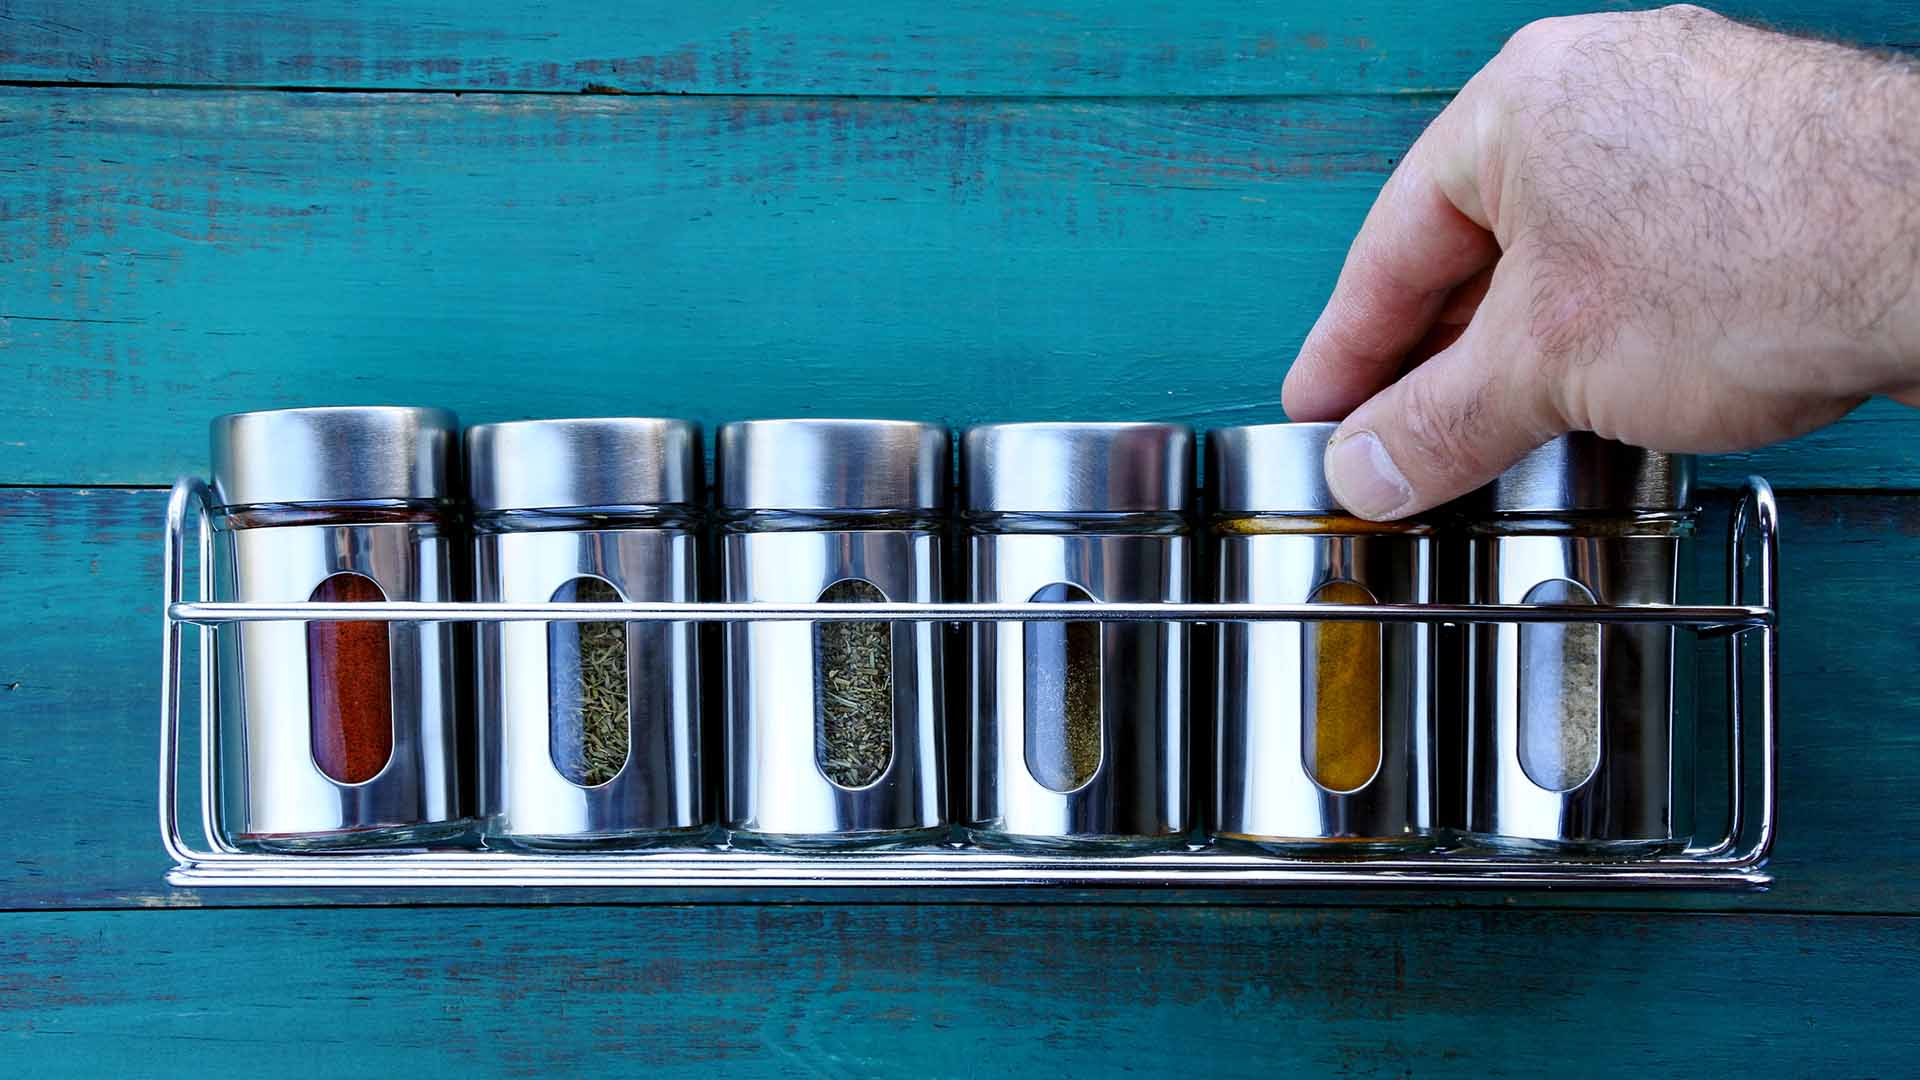 Chef hand returning spice into a spice rack. Food background. copy space